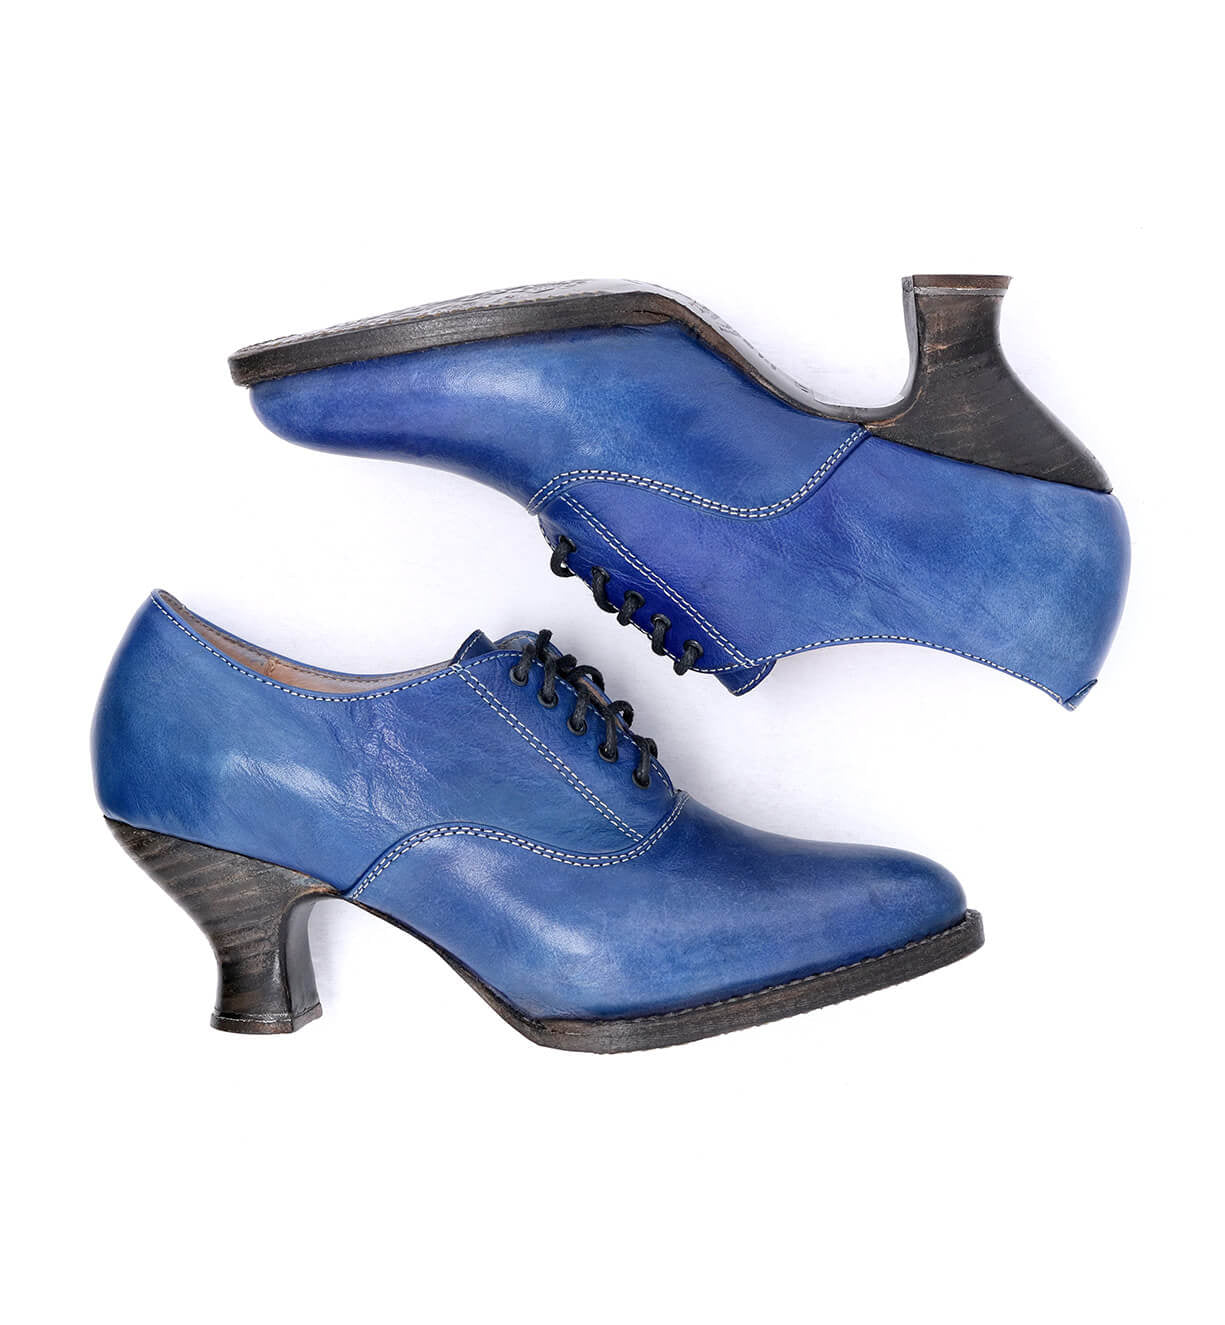 A pair of Janet Oak Tree Farms blue leather shoes with a lace-up front on a white background.